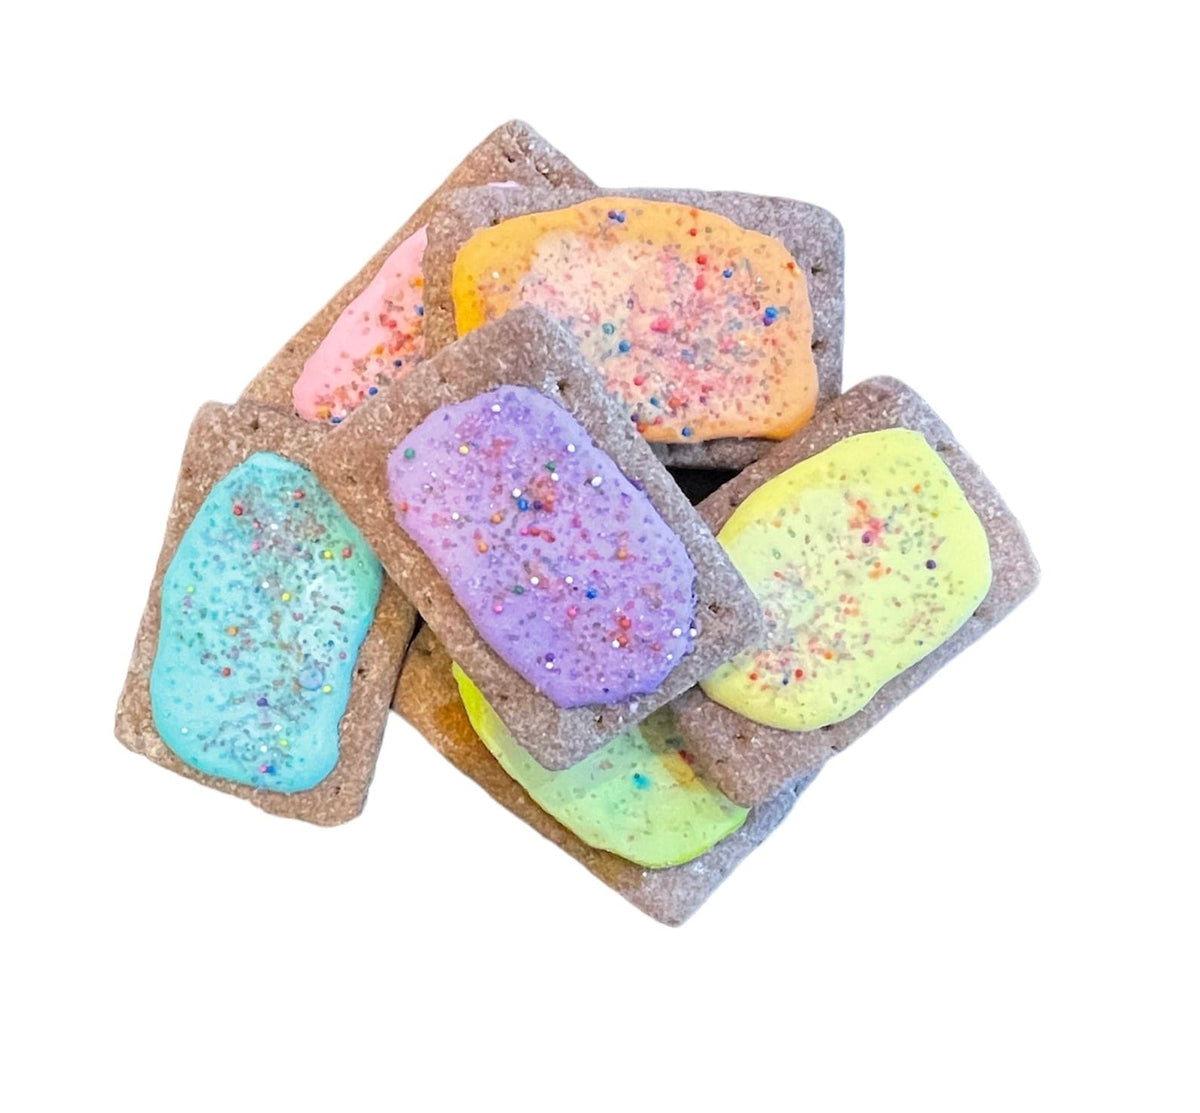 Snaks 5th Avenchew Treats Spring Mix Snaks 5th Avenchew- Poptarts for Ponies equestrian team apparel online tack store mobile tack store custom farm apparel custom show stable clothing equestrian lifestyle horse show clothing riding clothes horses equestrian tack store